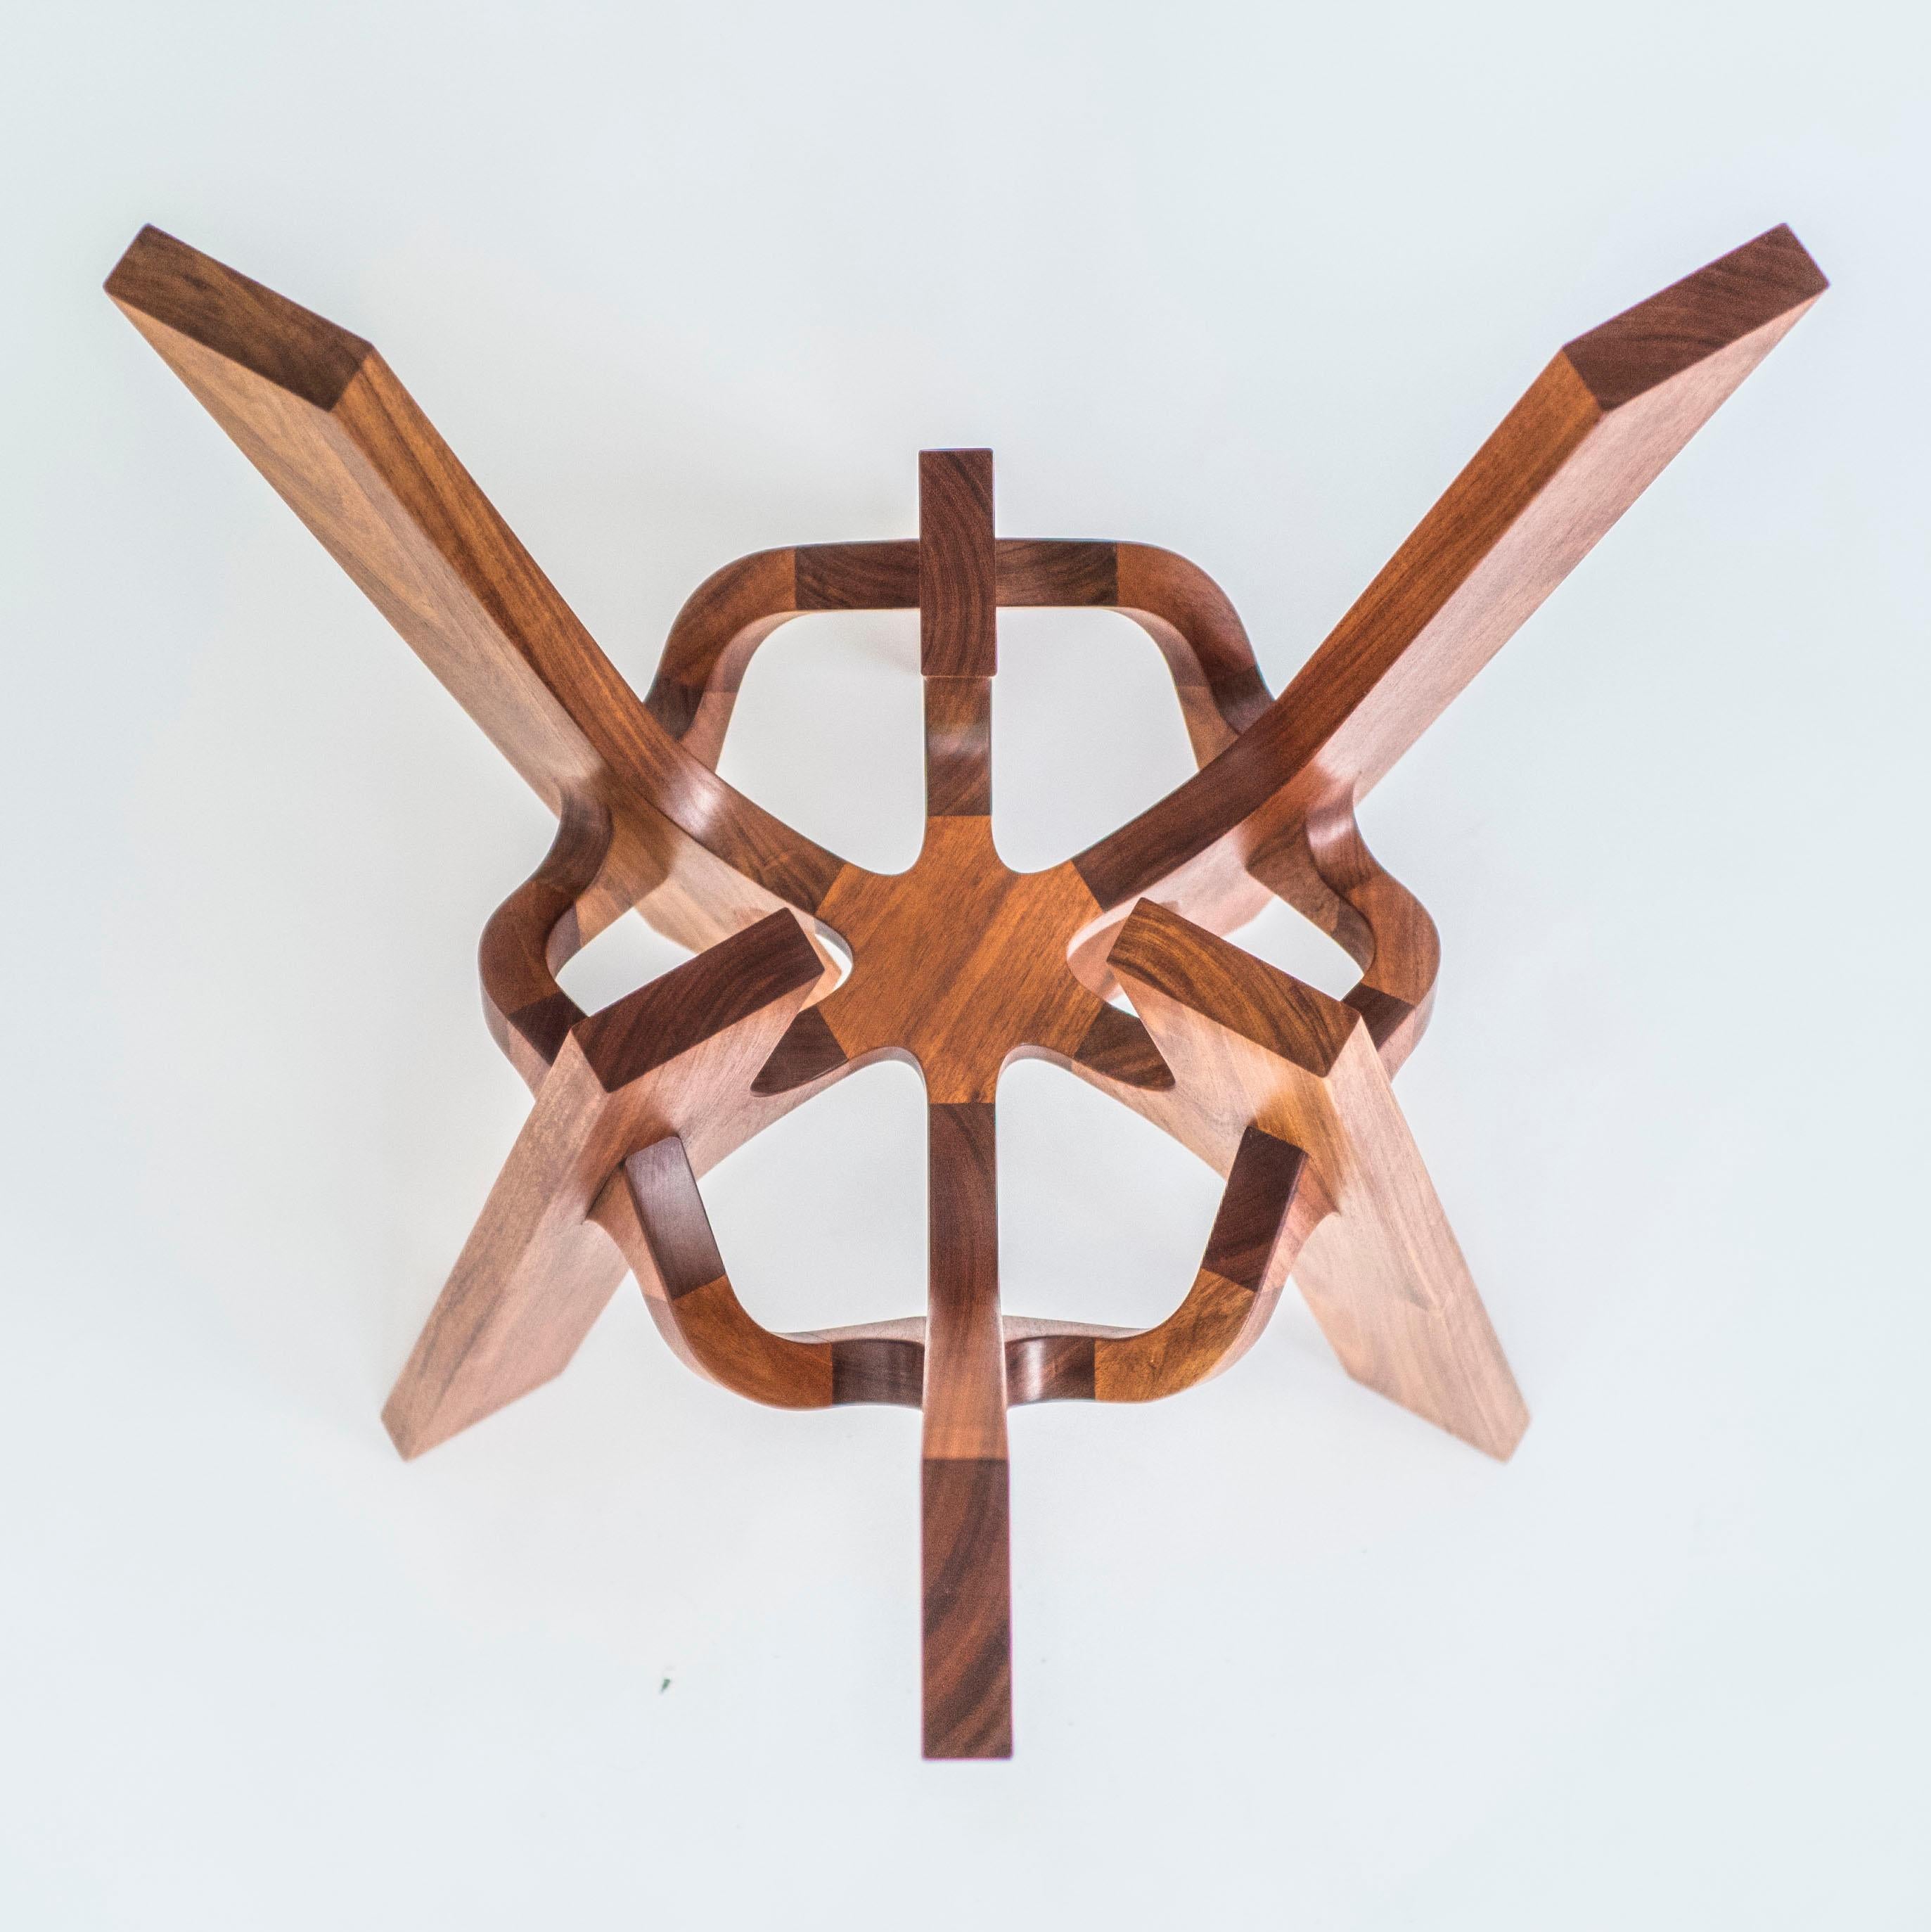 Astra, Geometric Sculptural Center Table Made of Solid Wood by Pedro Cerisola For Sale 5